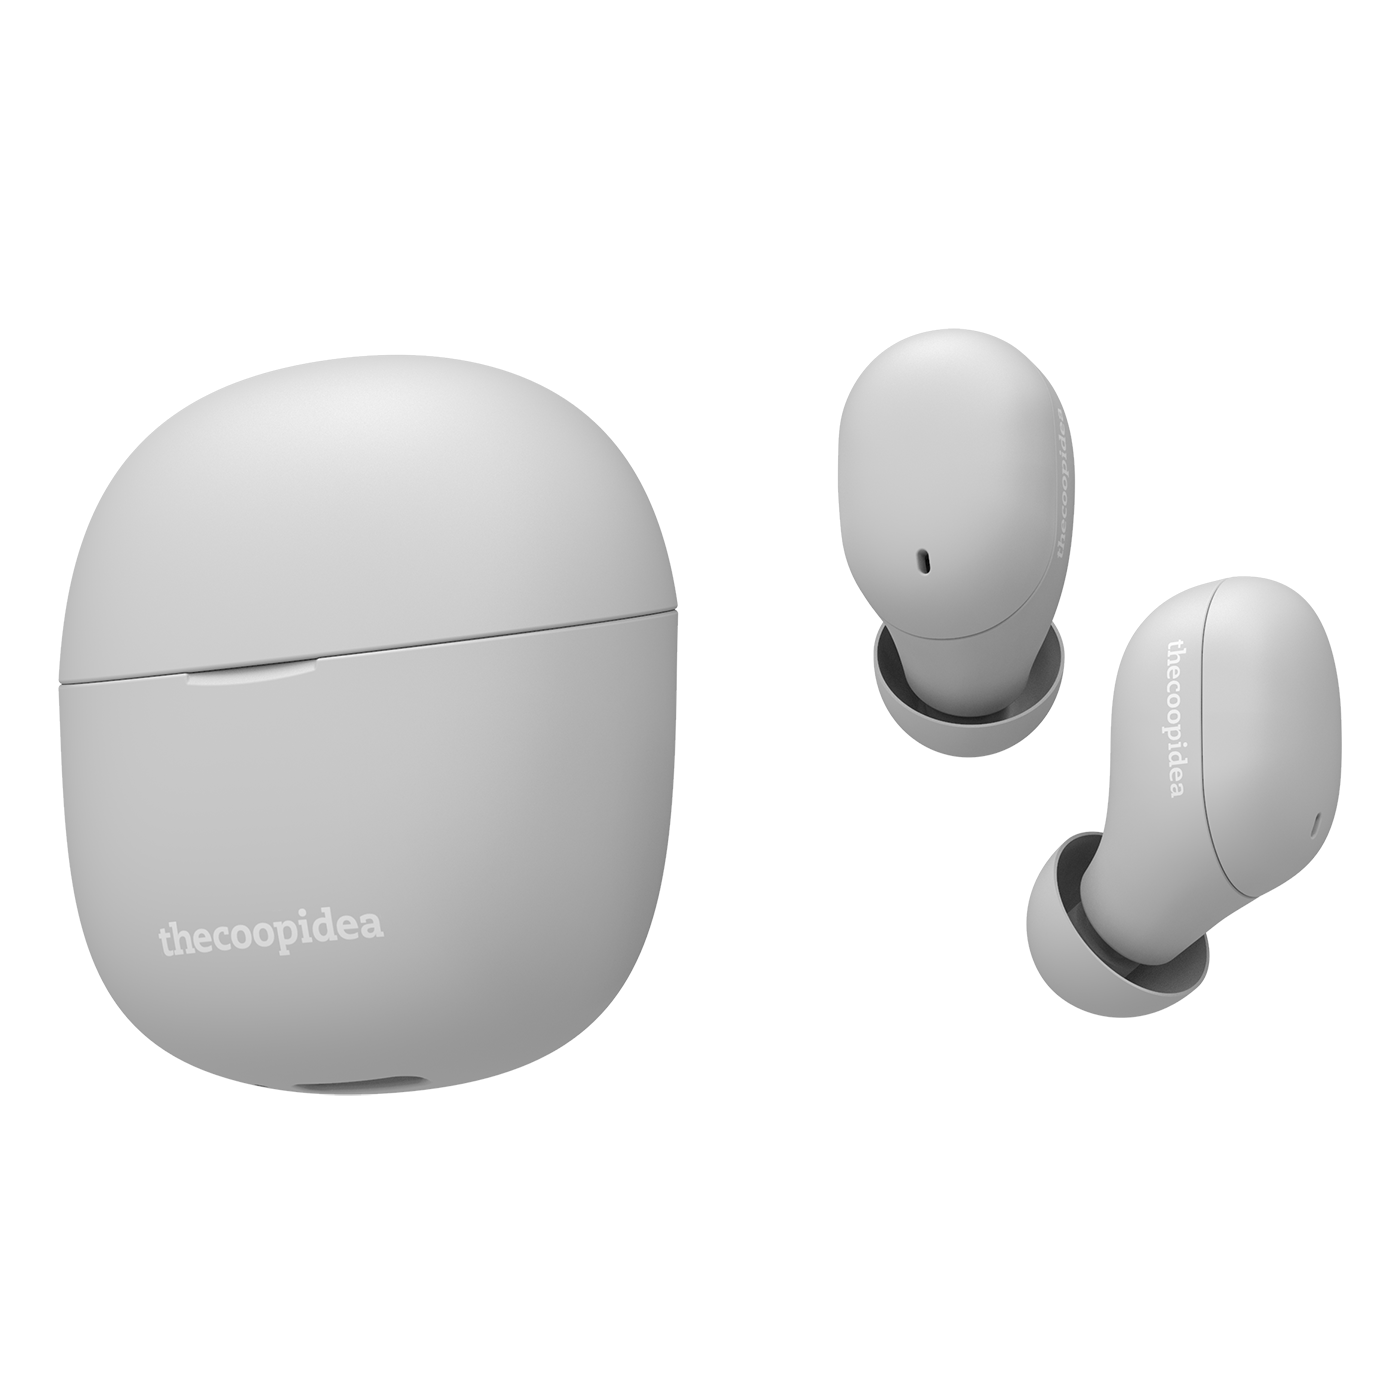 thecoopidea BEANS AIR True Wireless Earbuds - Ash